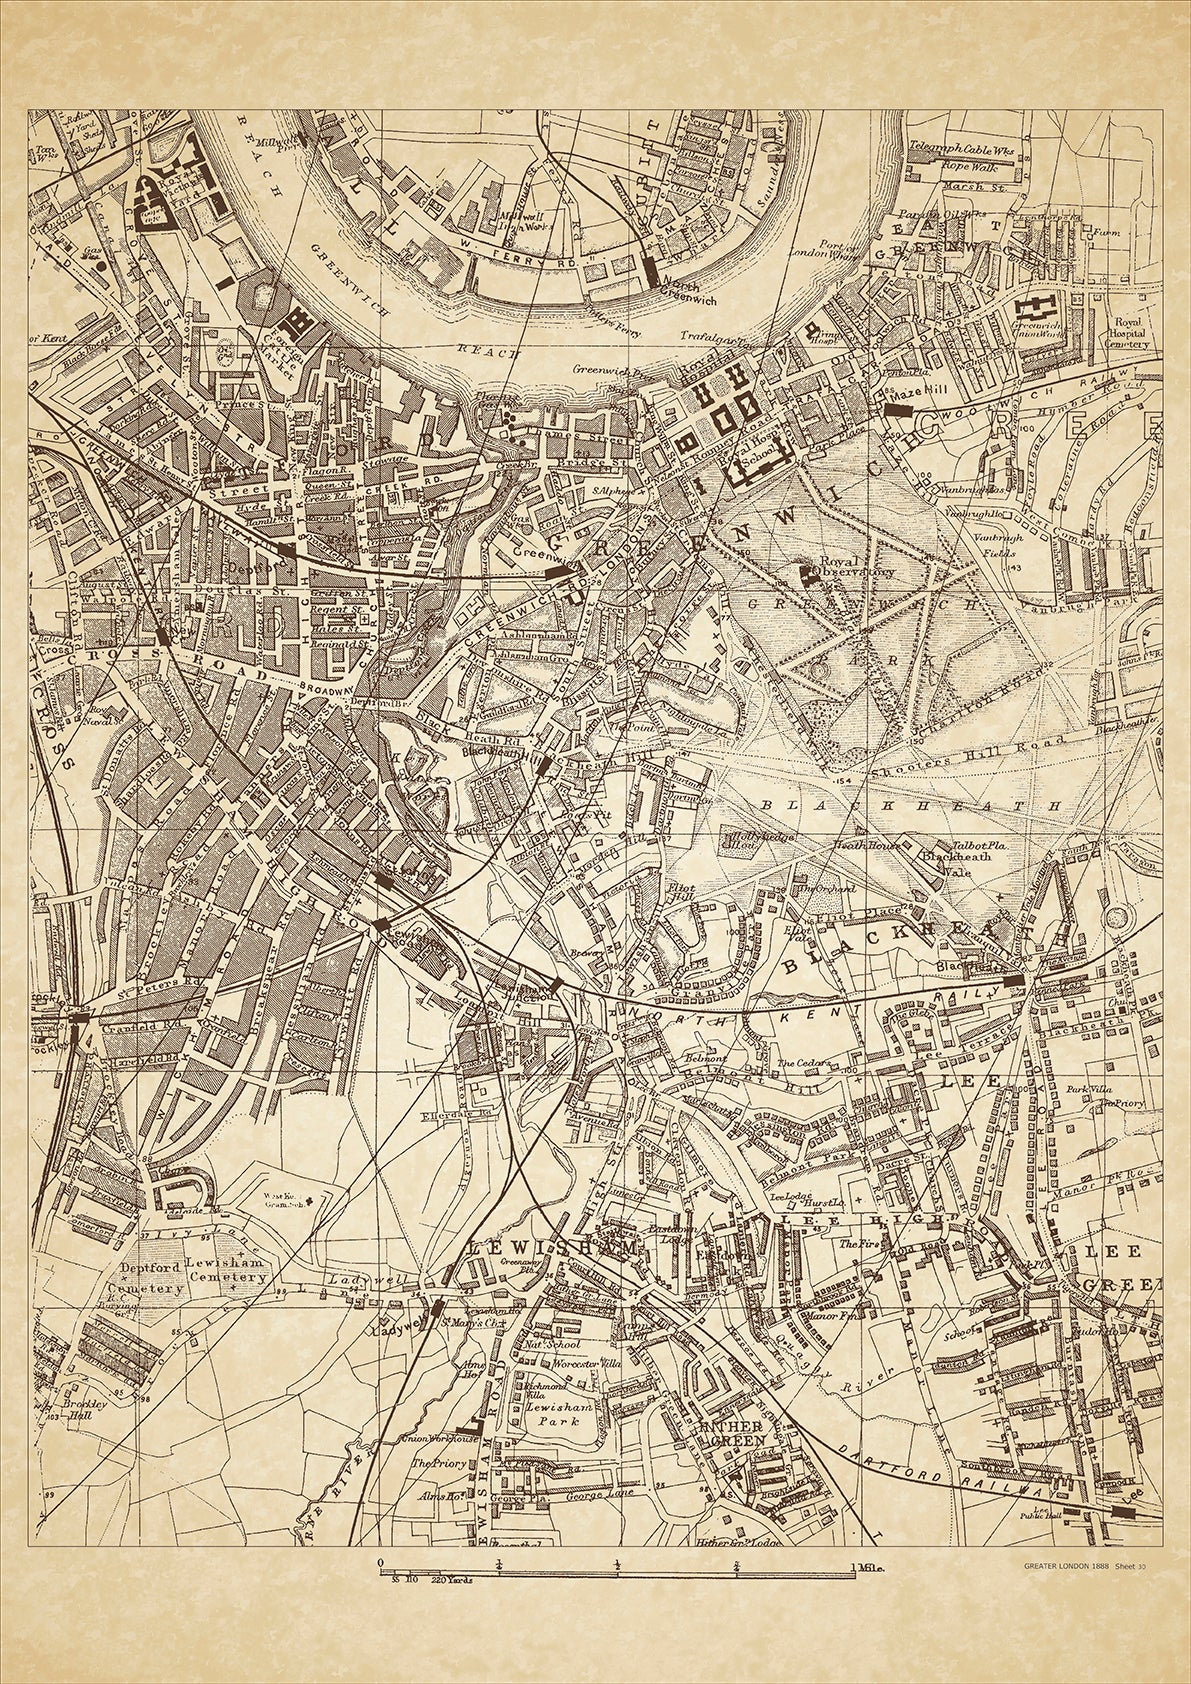 Greater London in 1888 Series - showing Greenwich, Deptford, Lewisham, Blackheath, Hither Green, Lee, Lee Green - sheet 30